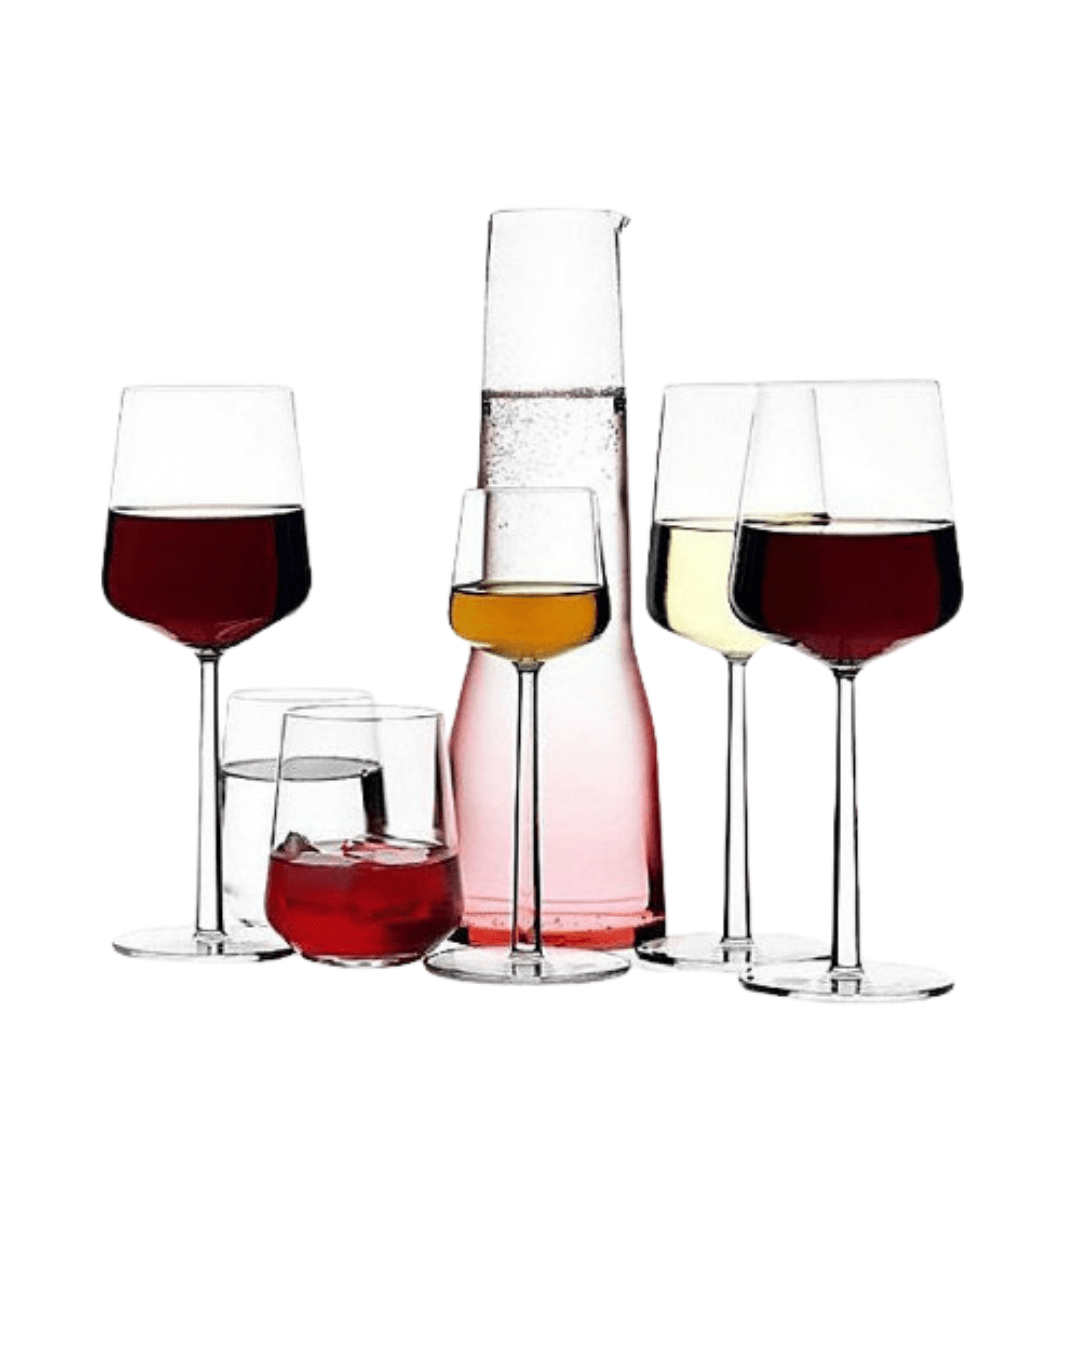 Discover Iittala Iittala | Essence Champagne Glass - Set of 4 online at PENTICTON